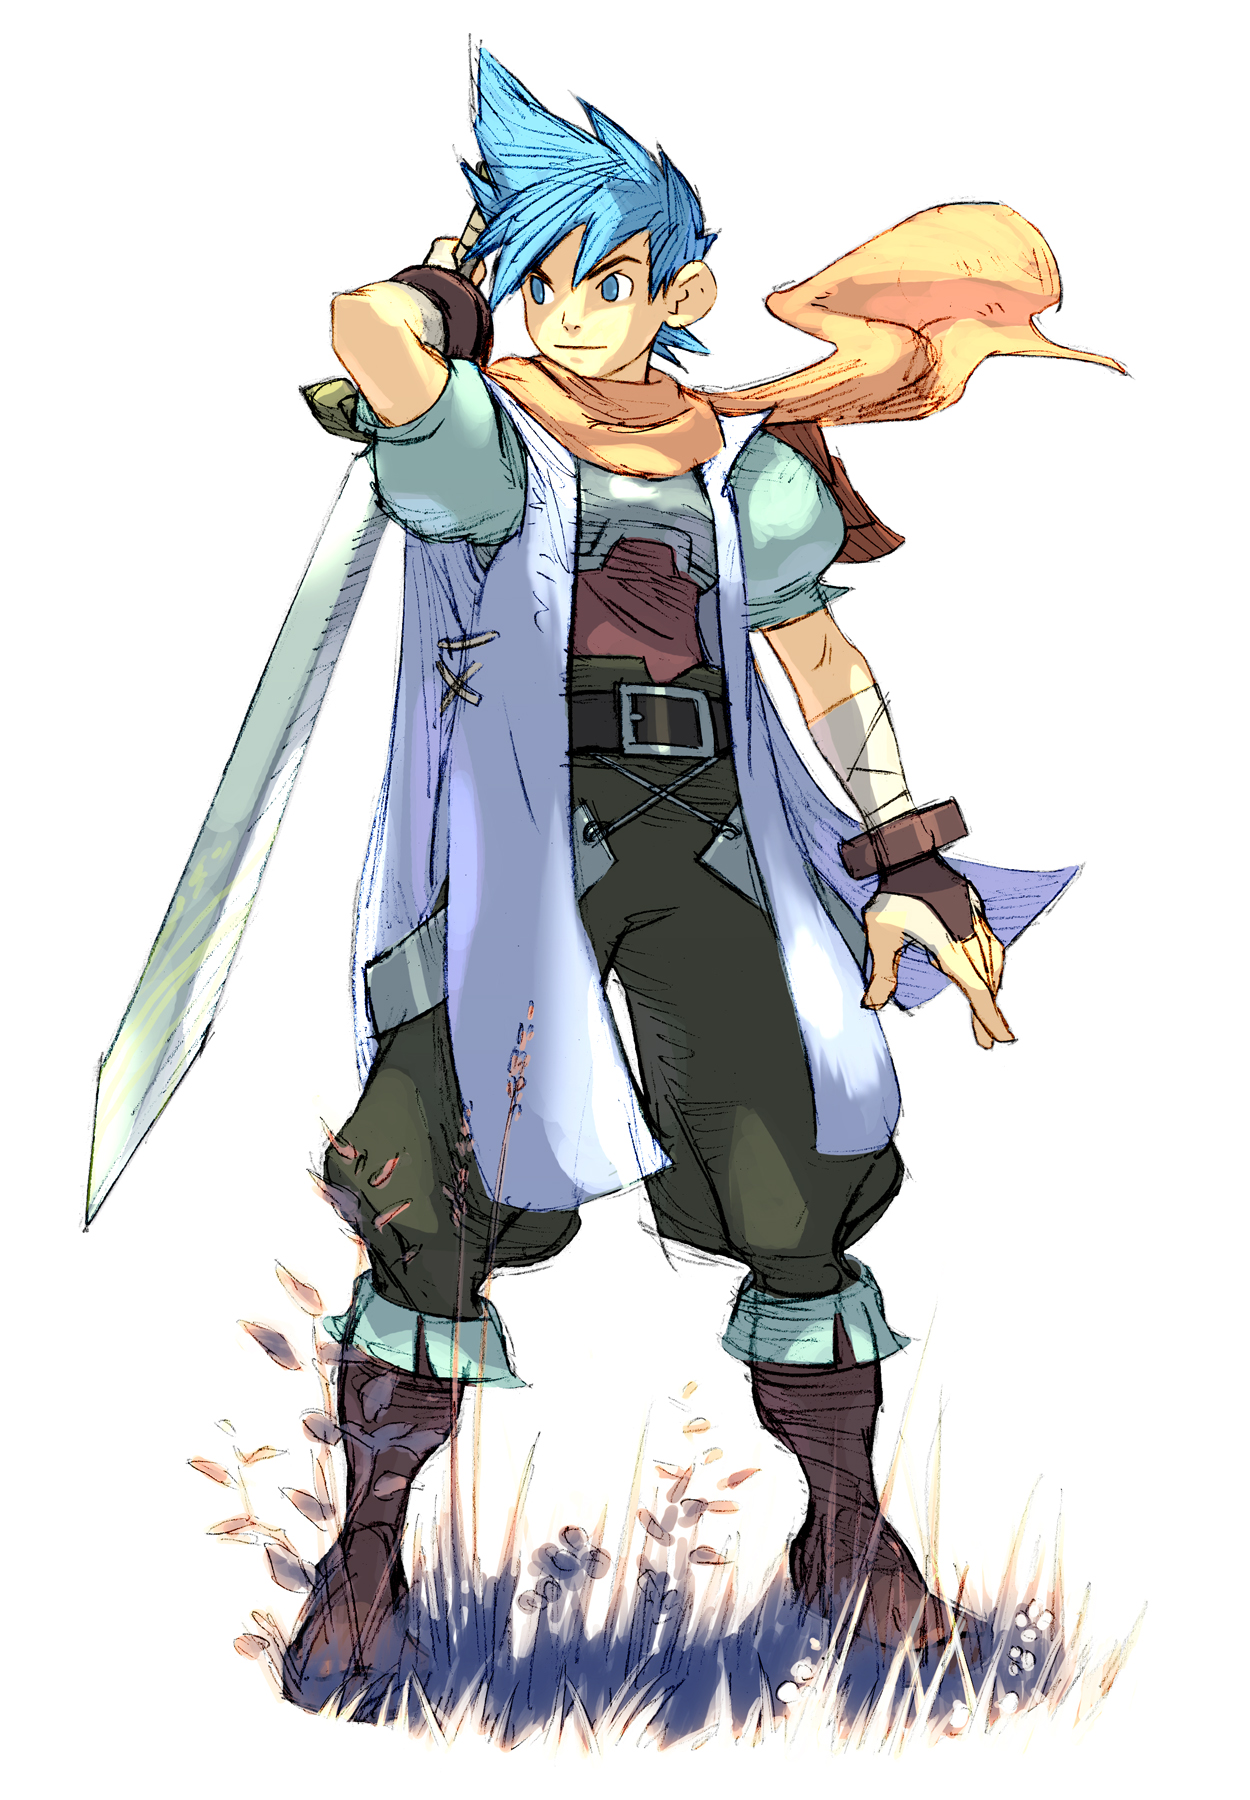 Breath of Fire and Scan Gallery